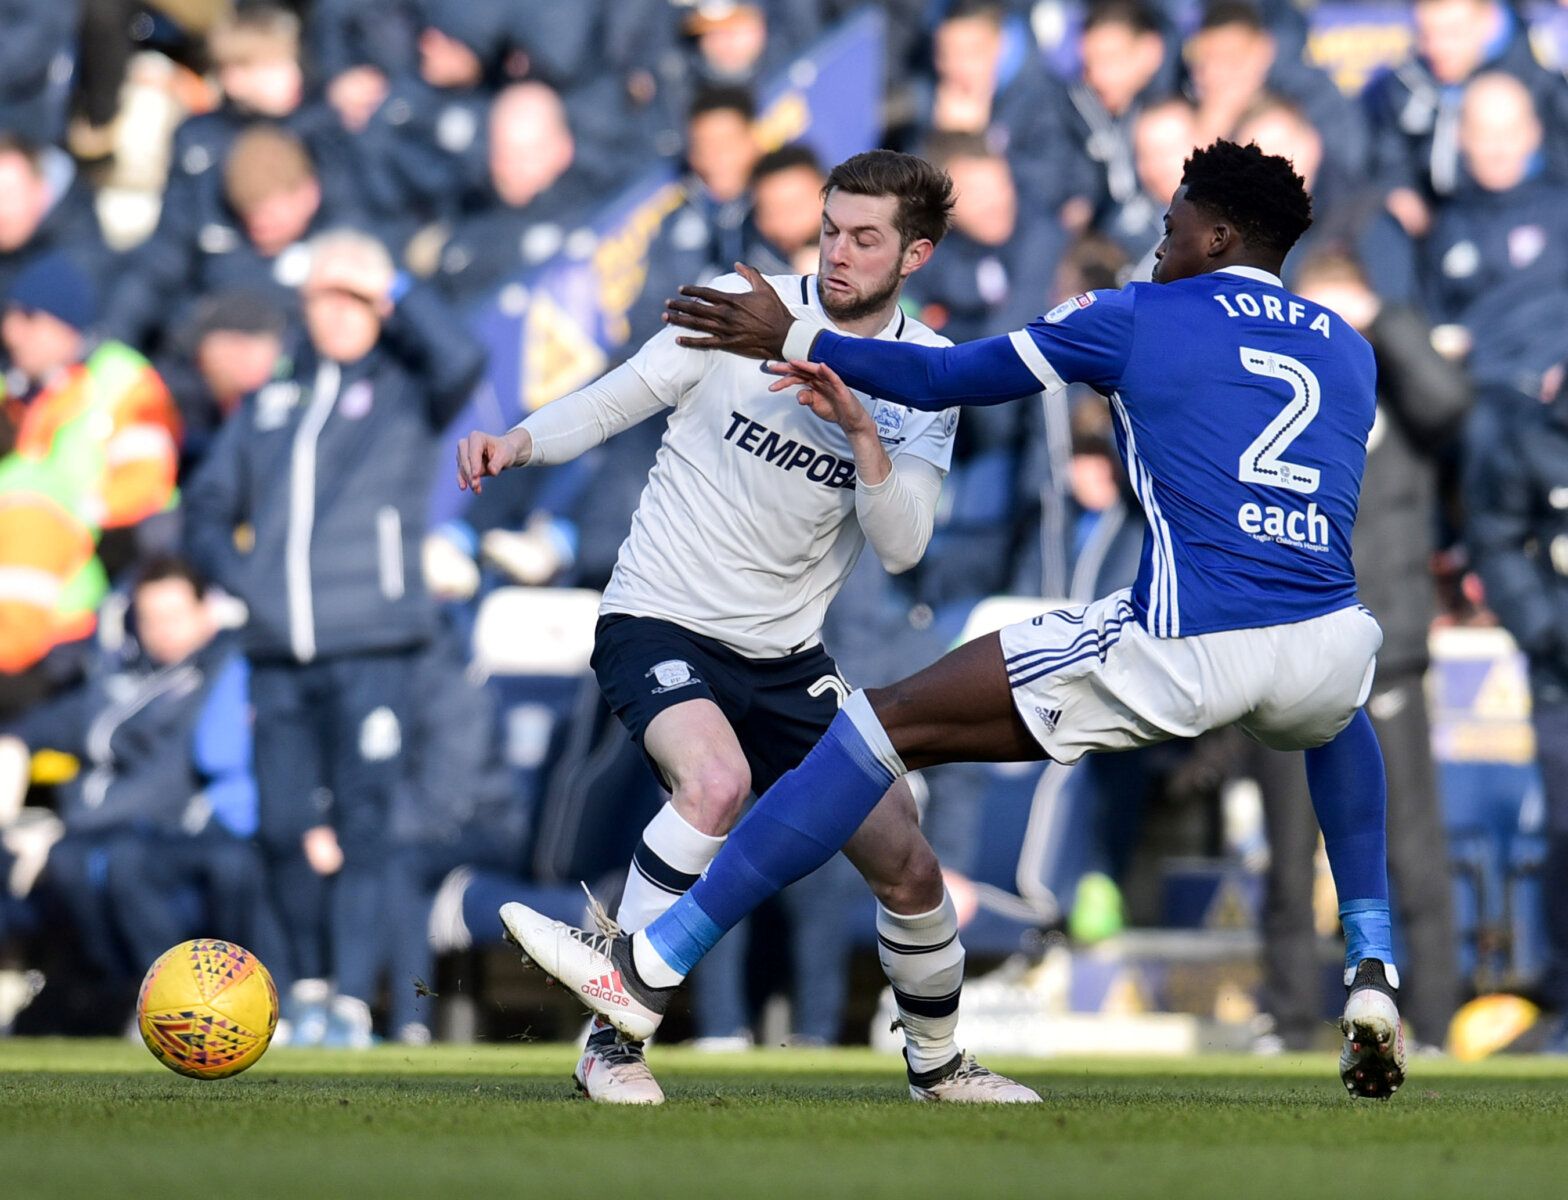 Soccer Football - Championship - Preston North End vs Ipswich Town - Deepdale, Preston, Britain - February 24, 2018  PrestonÕs Tom Barkhuizen in action with Ipswich Town's Dominic Iorfa  Action Images/Paul Burrows  EDITORIAL USE ONLY. No use with unauthorized audio, video, data, fixture lists, club/league logos or 